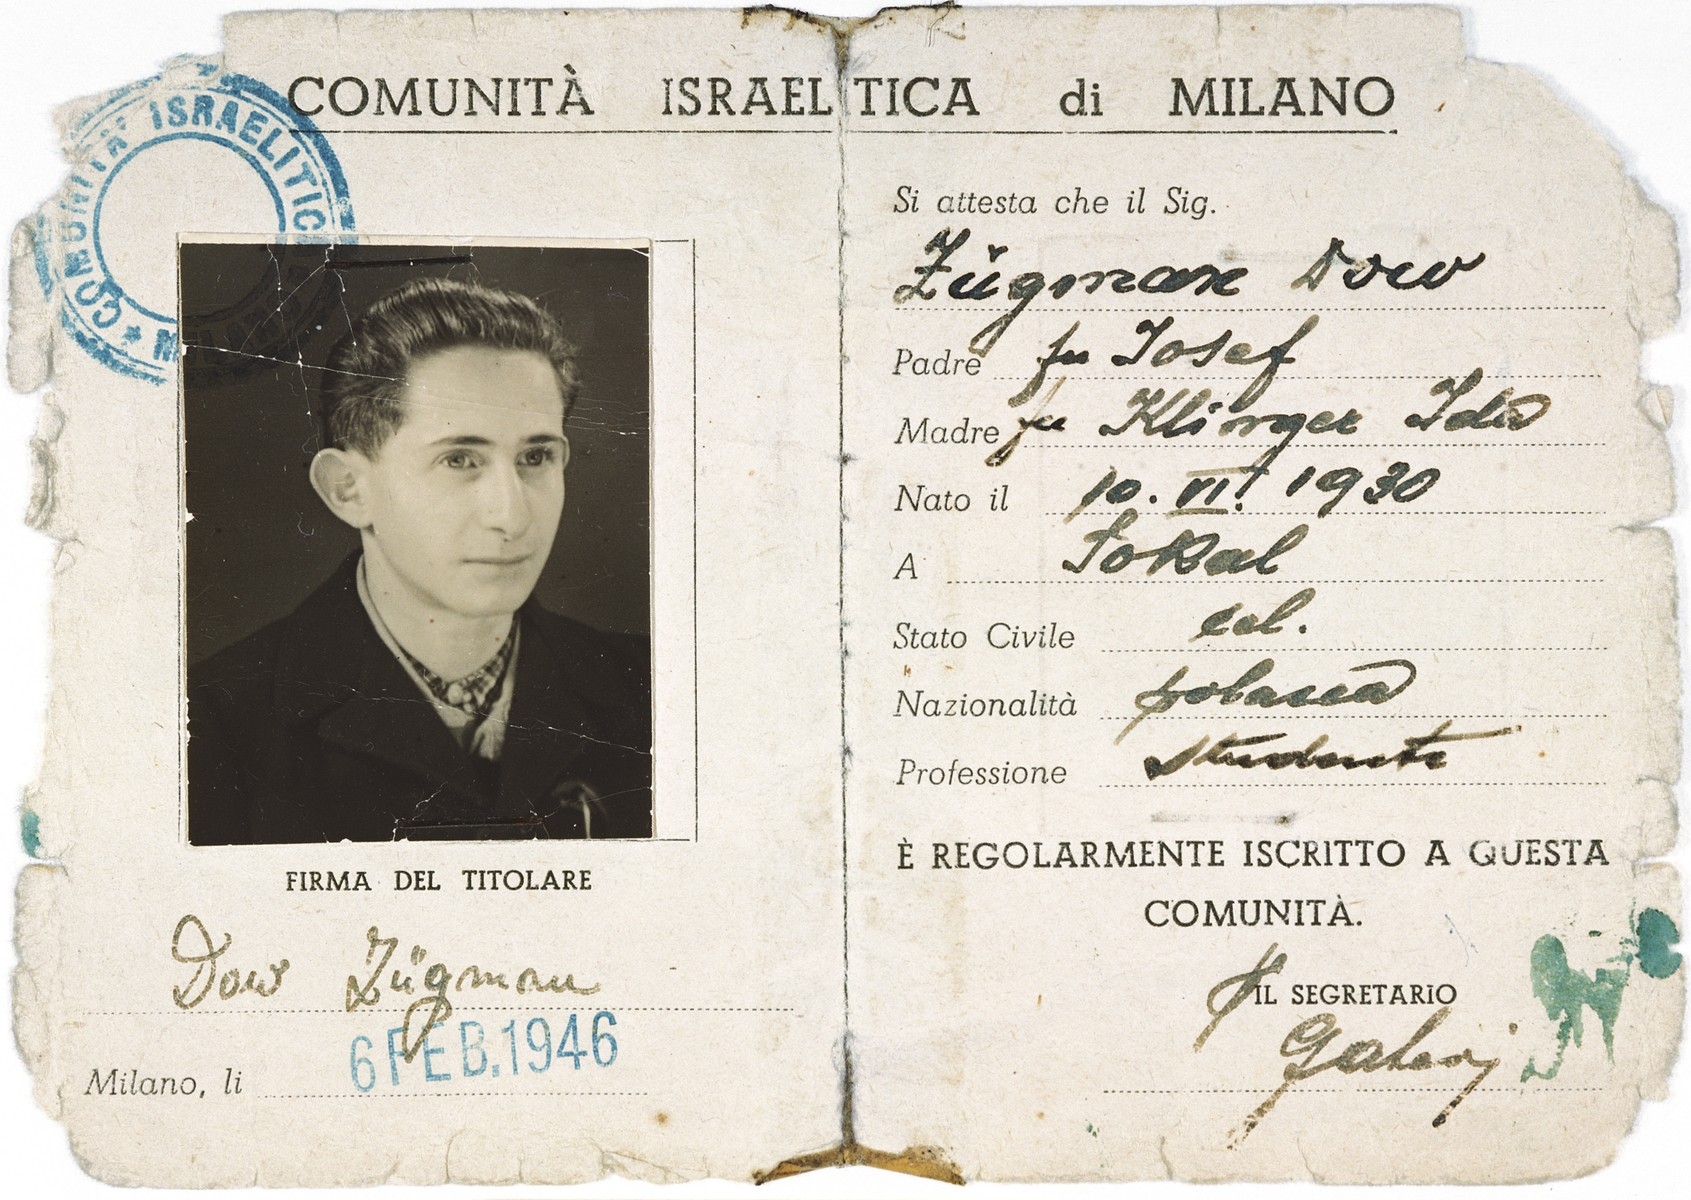 Dov Zugman's identification card as a member of the Jewish community of Milan.